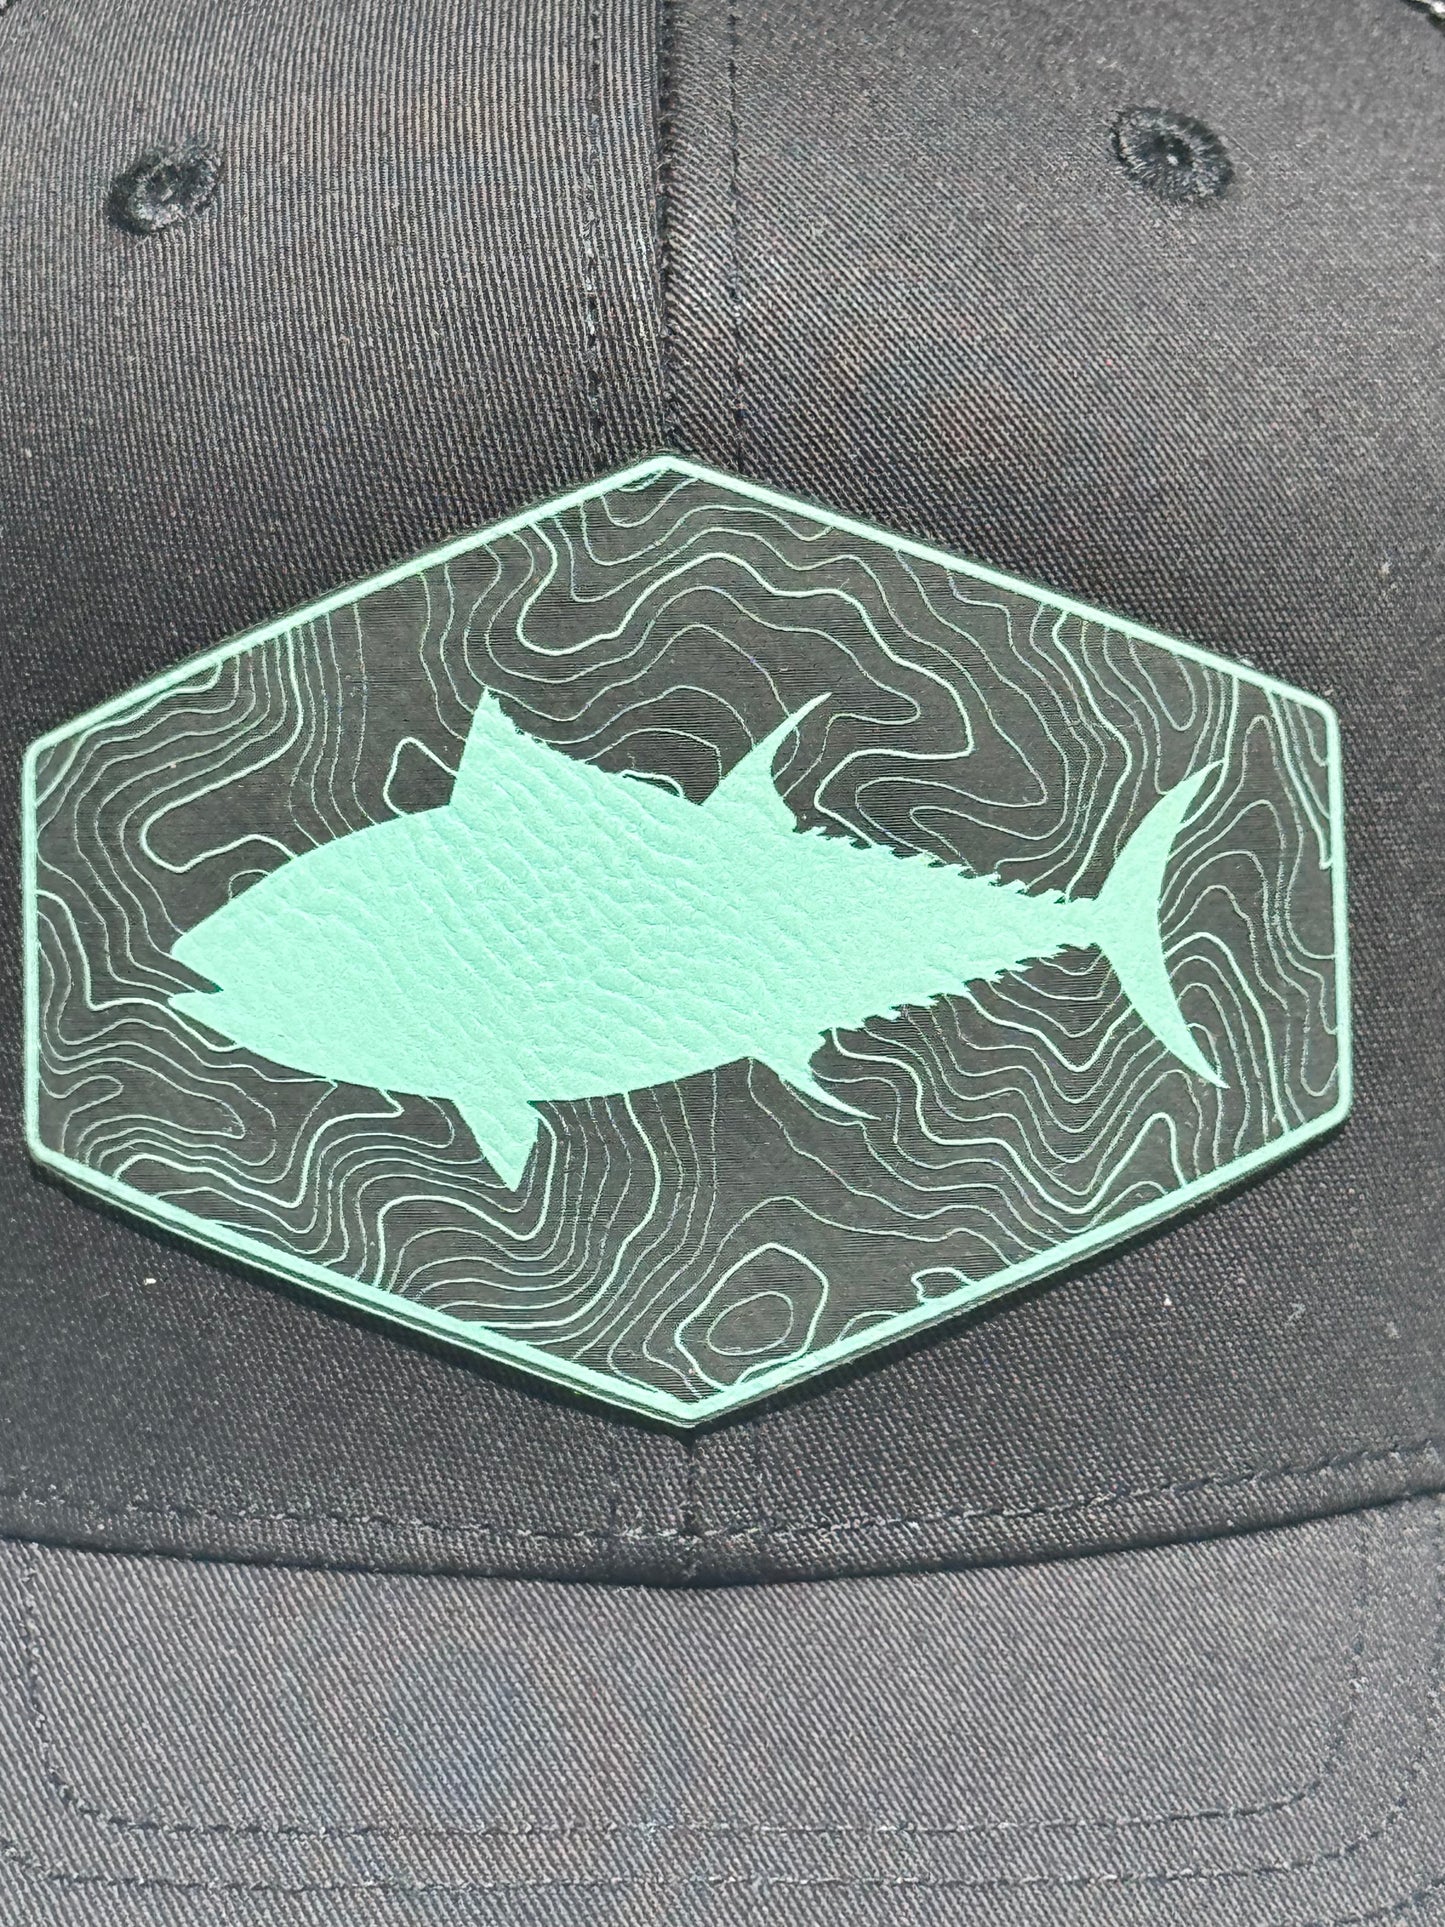 Black Snapback with Tuna Topo Patch - Teal